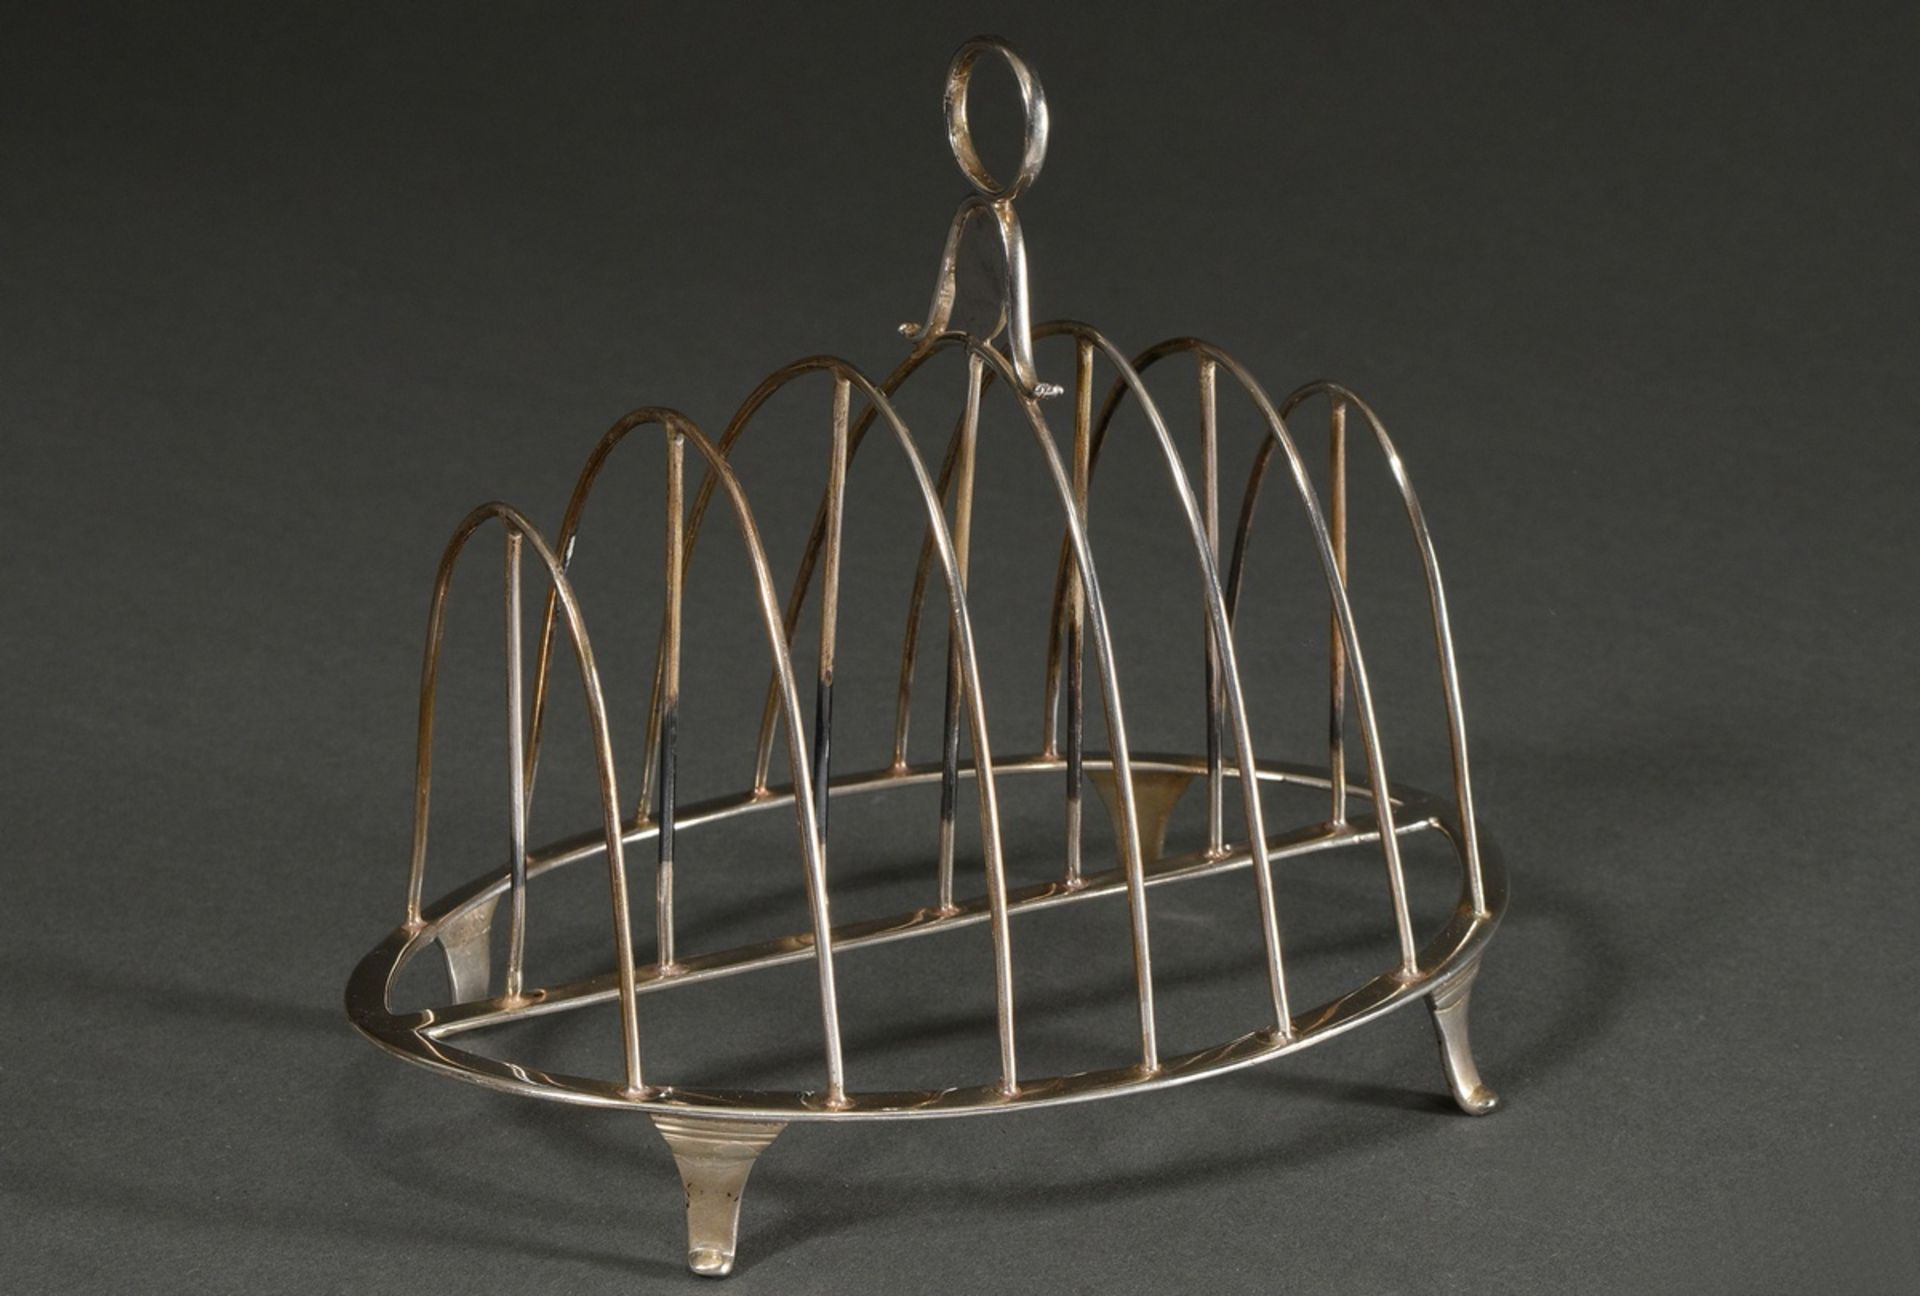 English toast stand for six slices, MZ: William Turner, London 1798, silver 925, 154g, 14.5x17x11.5 - Image 2 of 3